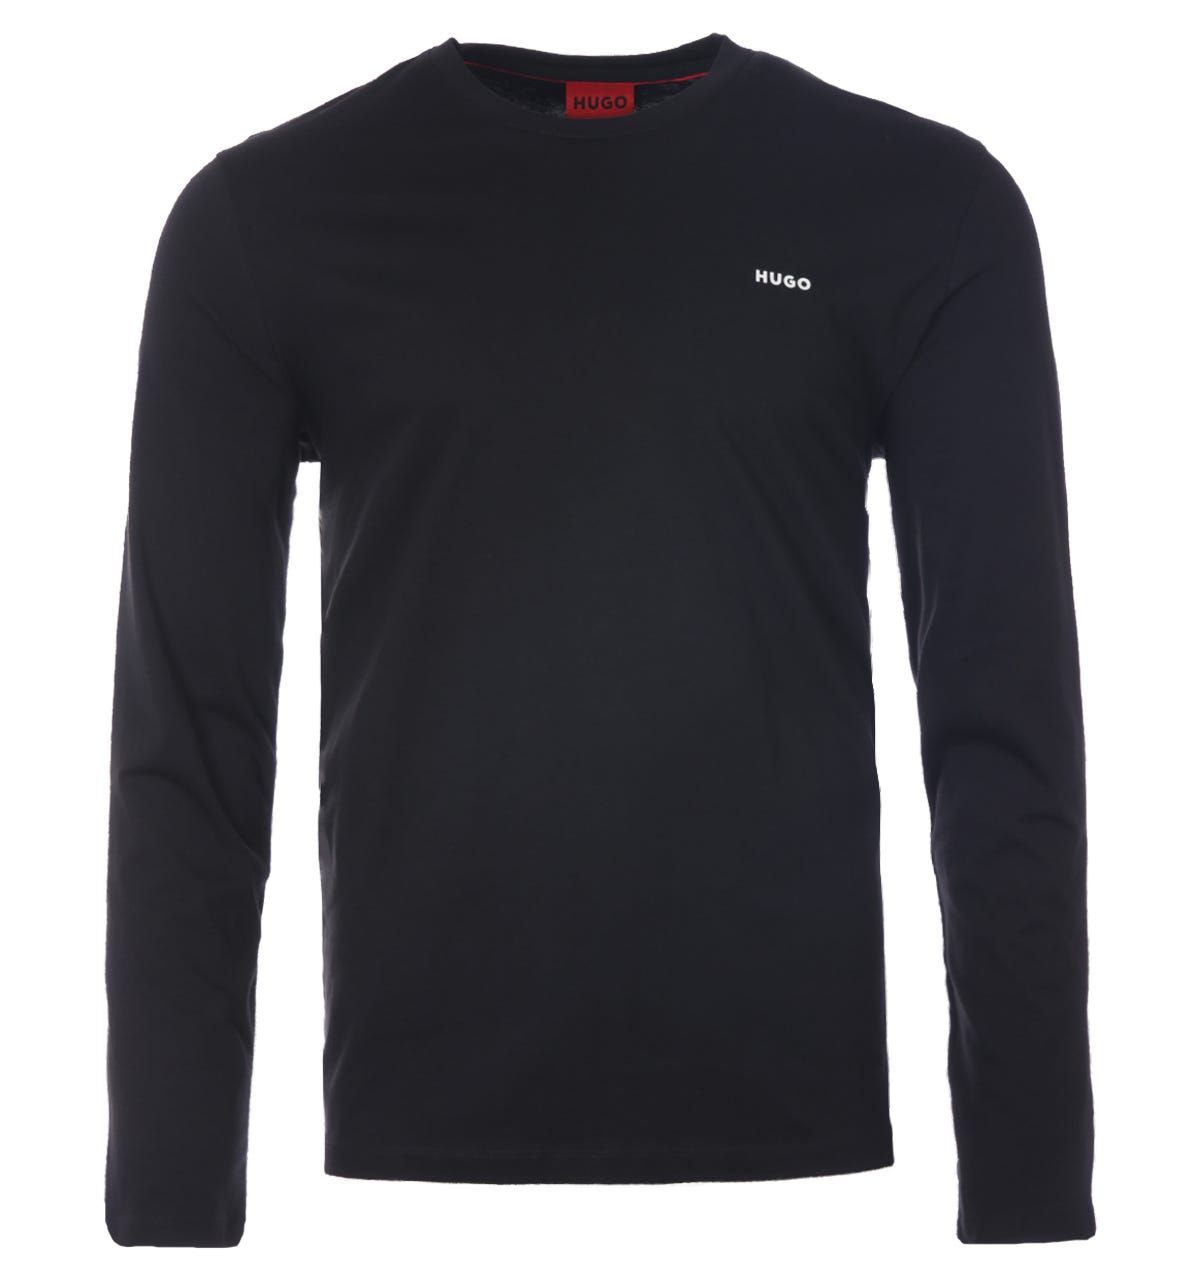 This classic long sleeve t-shirt from HUGO by Hugo Boss is crafted from sustainably sourced made in Africa cotton that not only feels great on your skin but is great for the planet too. Featuring a classic crew neck design with long sleeves. Finished with the iconic HUGO logo printed at the chest. Cotton made in Africa - an initiative of the Aid by Trade Foundation, one of the world's leading standards for sustainably produced cotton. Regular Fit, Pure Sustainably Sourced Cotton, Finely Ribbed Crew Neck, Long Sleeves, Clean Up Your Act Collection, HUGO Branding. Style & Fit: Regular Fit, Fits True to Size. Care & Composition:100% Cotton, Machine Wash.